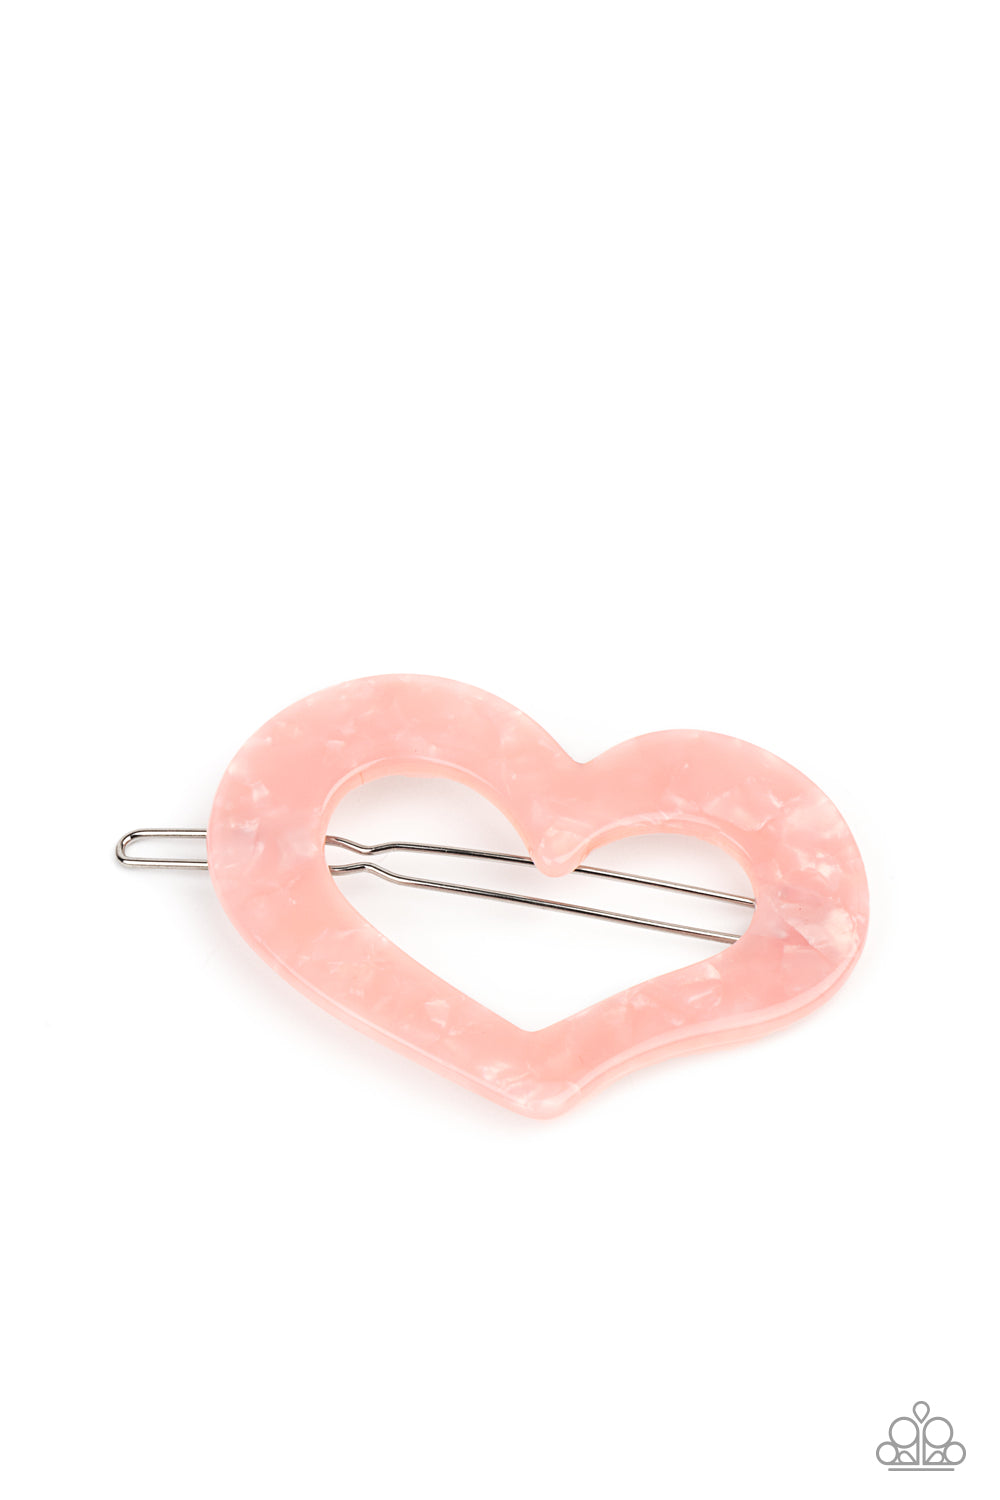 HEART Not to Love - Pink Hair Clip - Princess Glam Shop